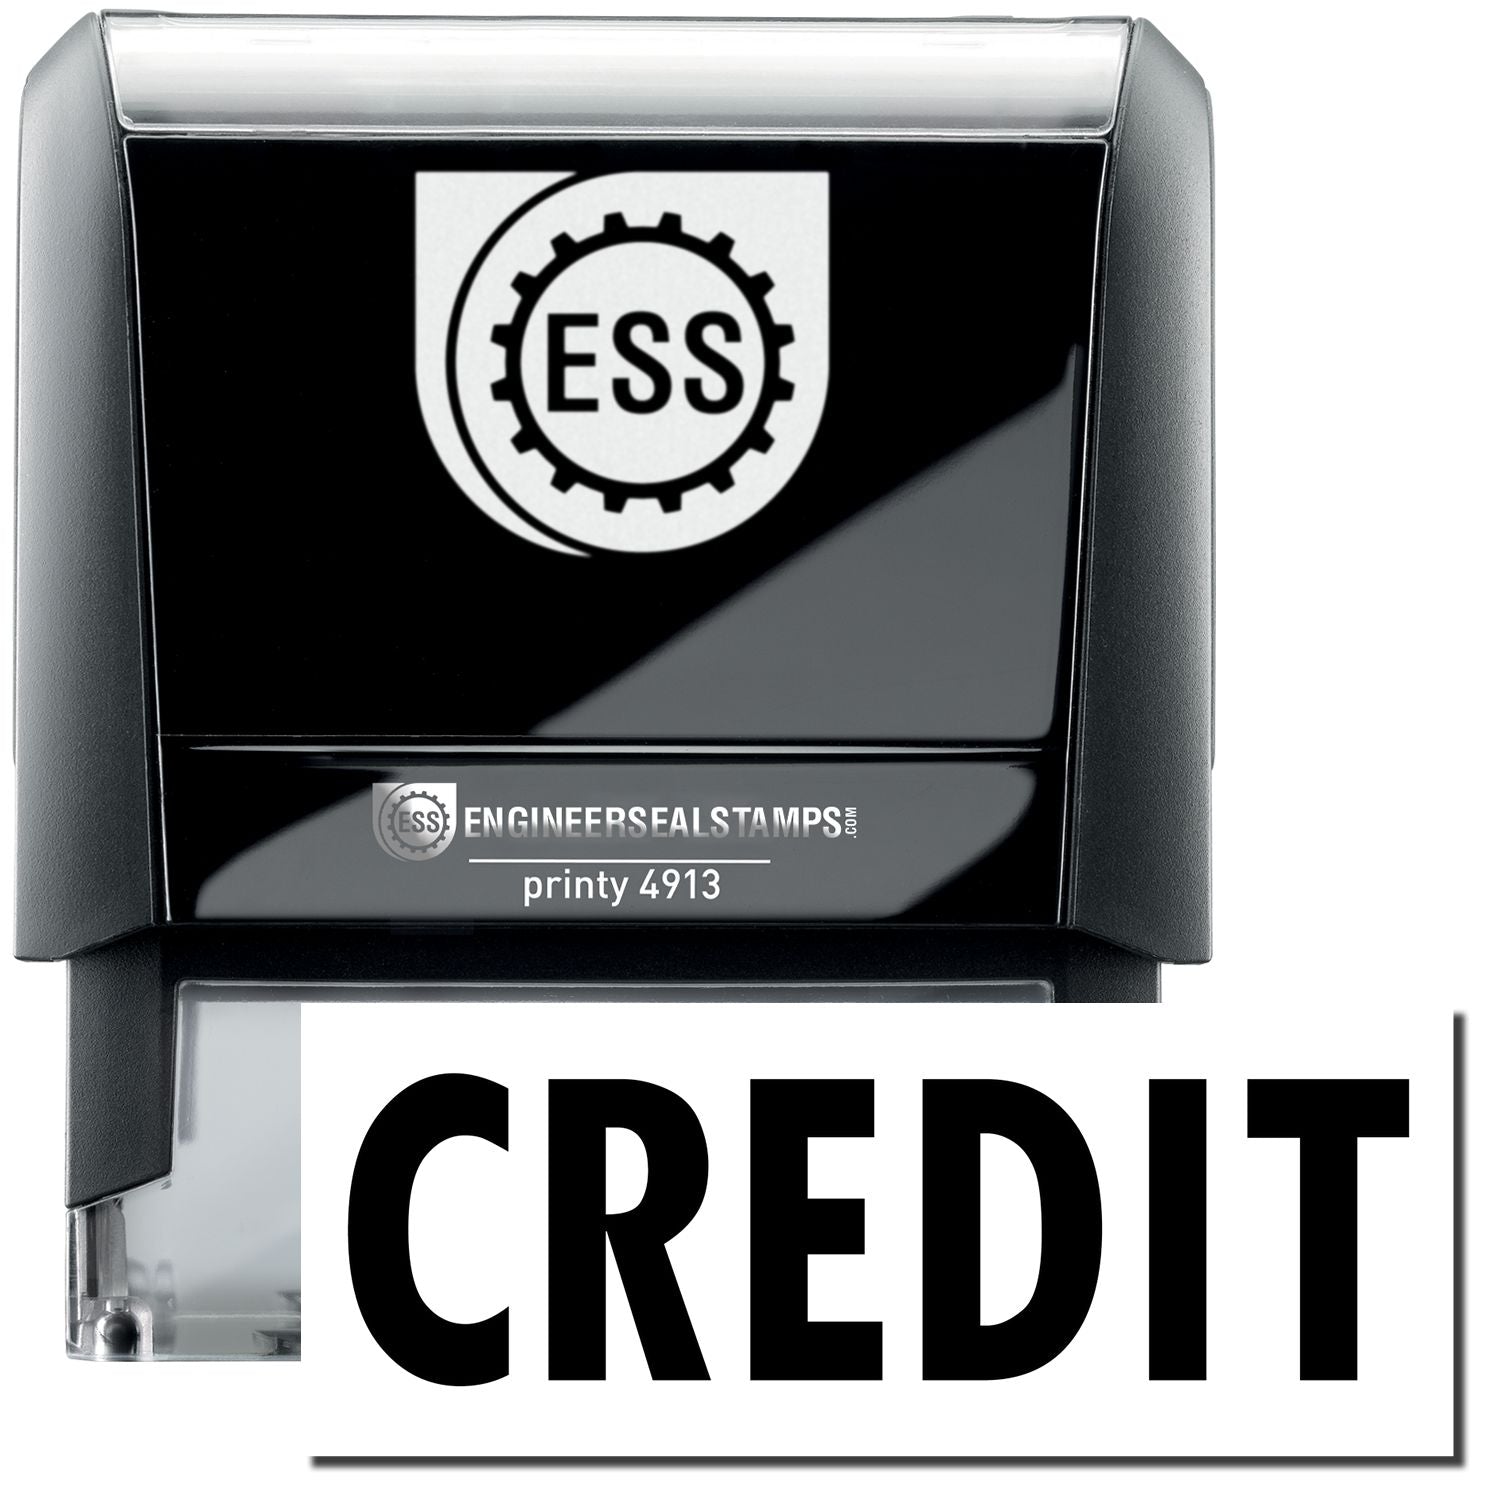 A large self-inking stamp with a stamped image showing how the text "CREDIT" in a large bold font is displayed by it.